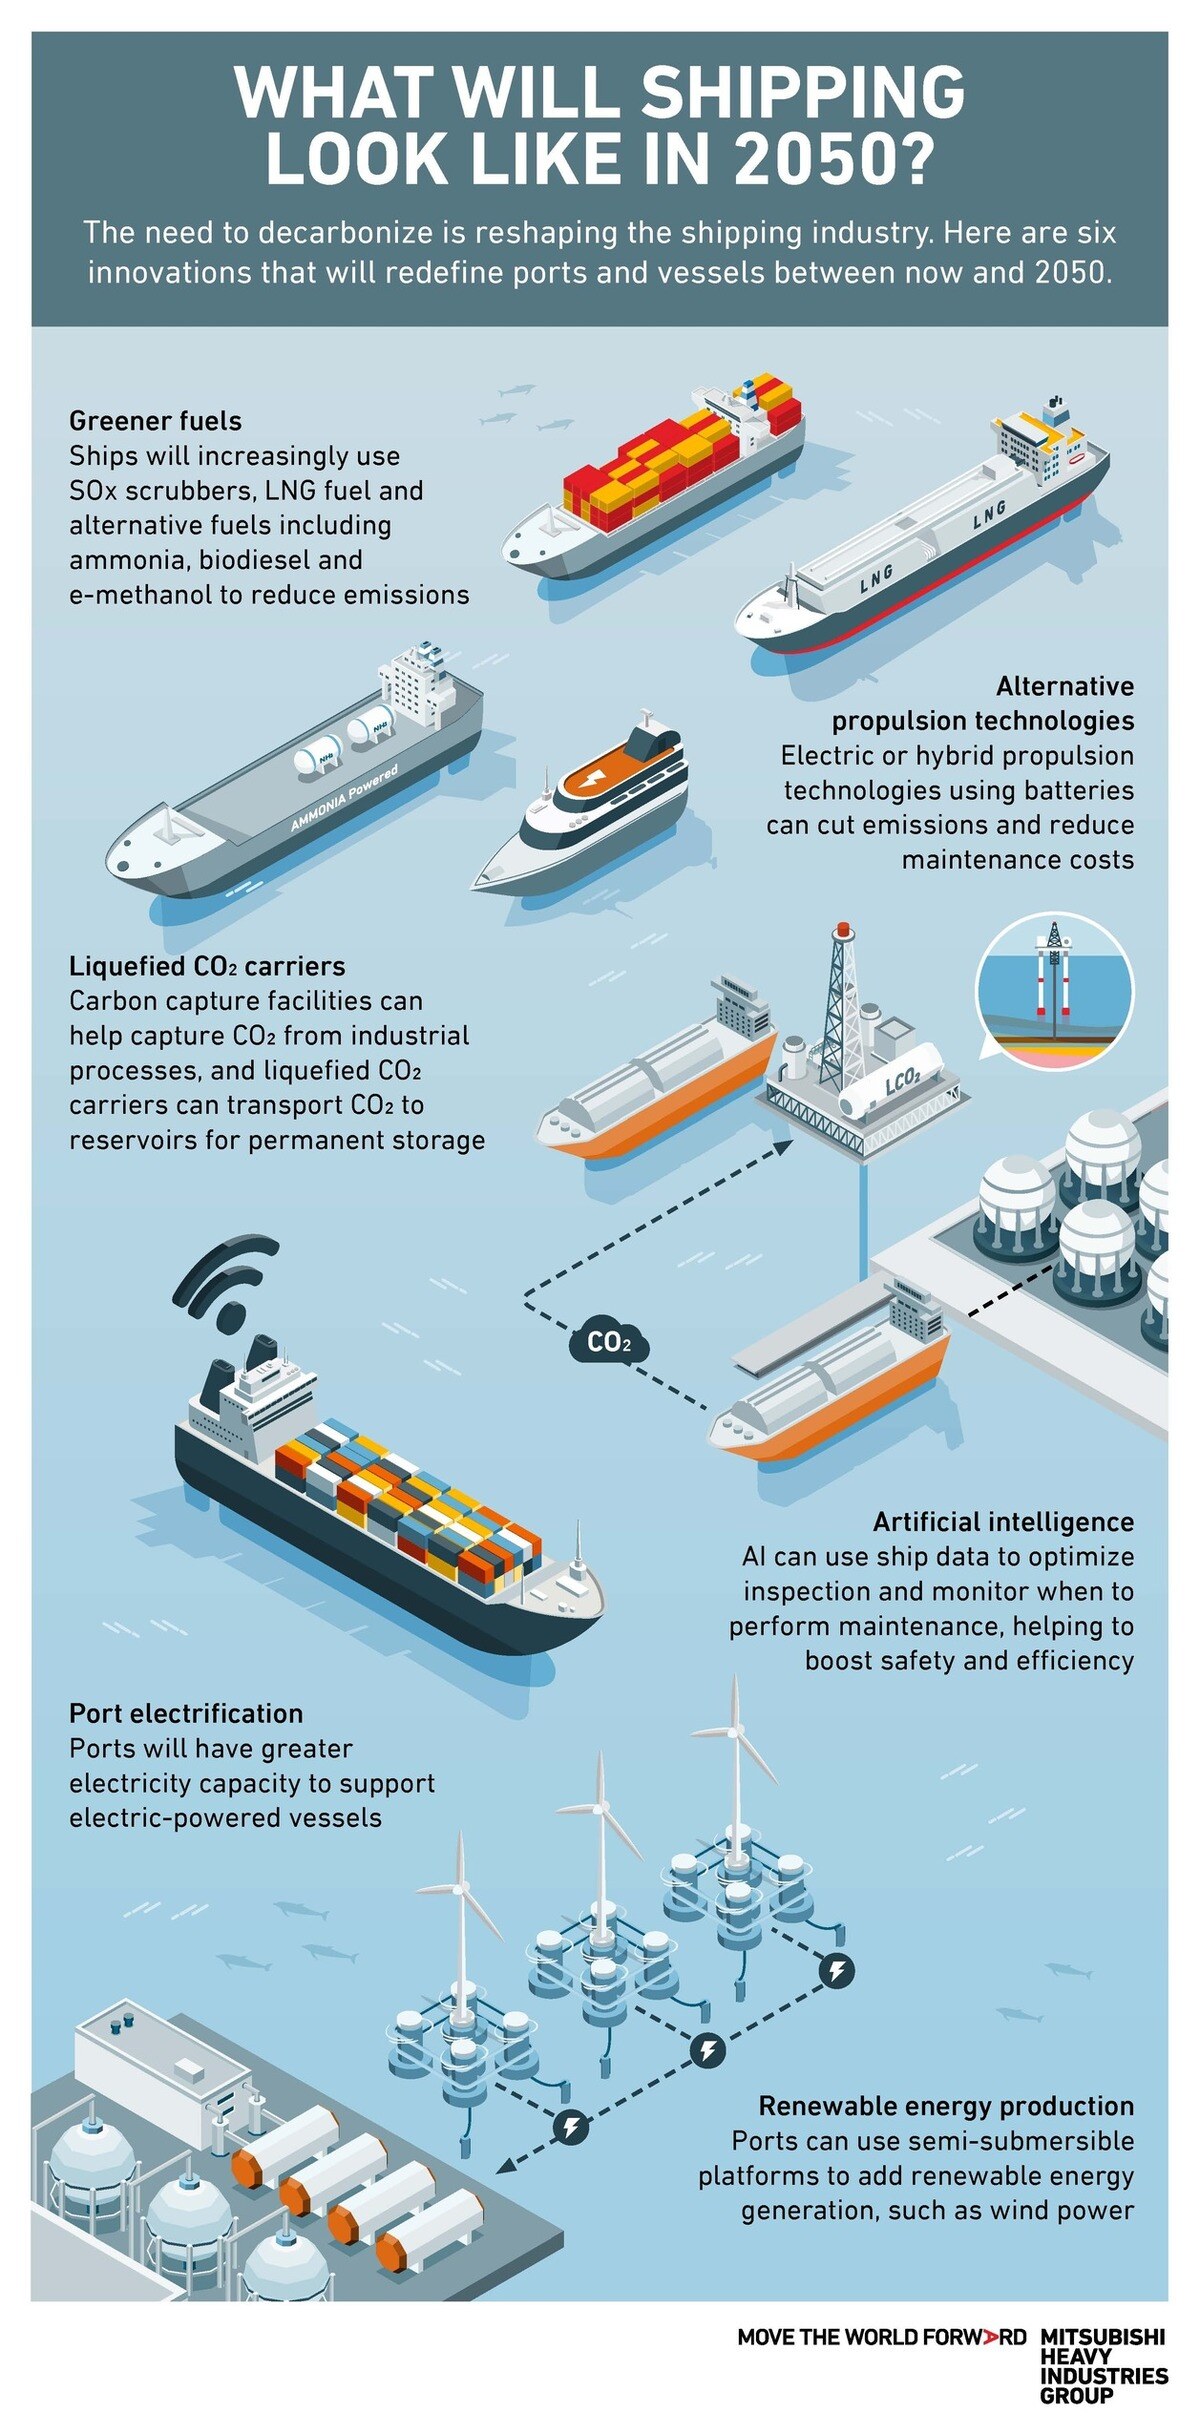 From greener fuels to artificial intelligence, a range of new technologies and innovations will help shipping keep up with growing demand